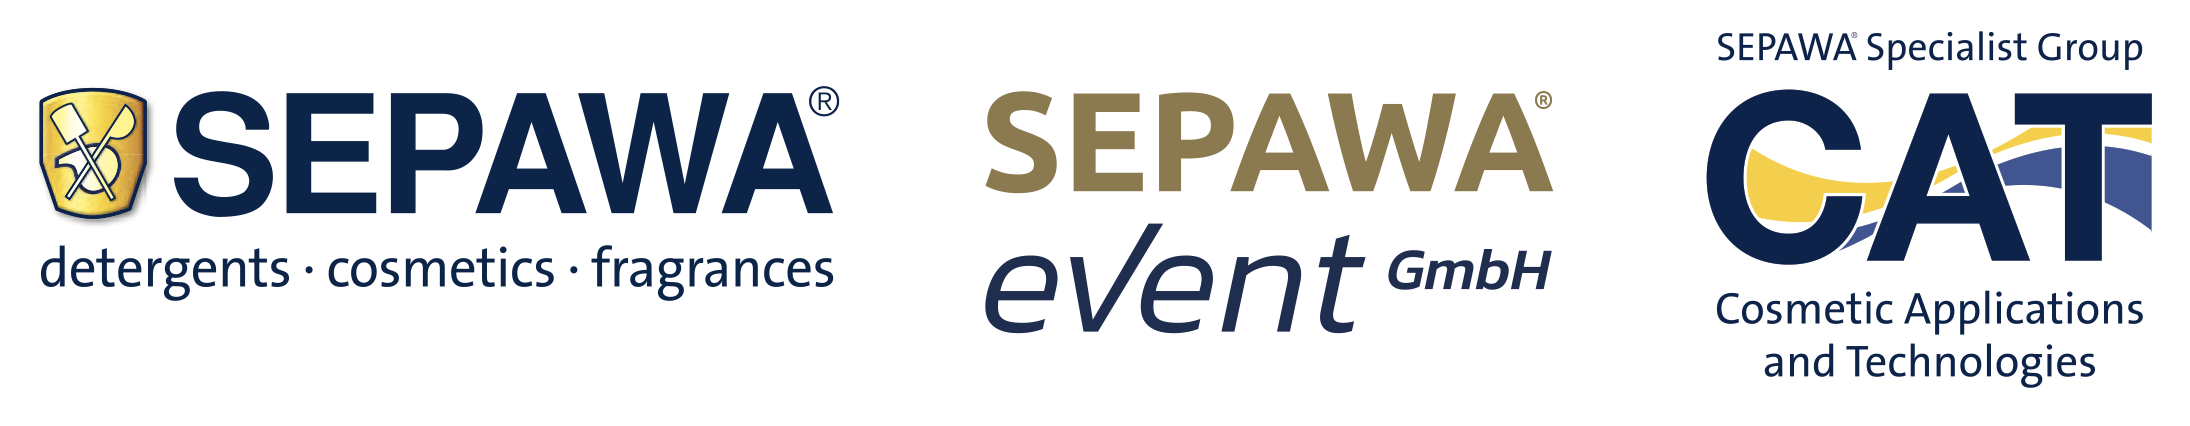 Lecture Event of the SEPAWA® Specialist Group 